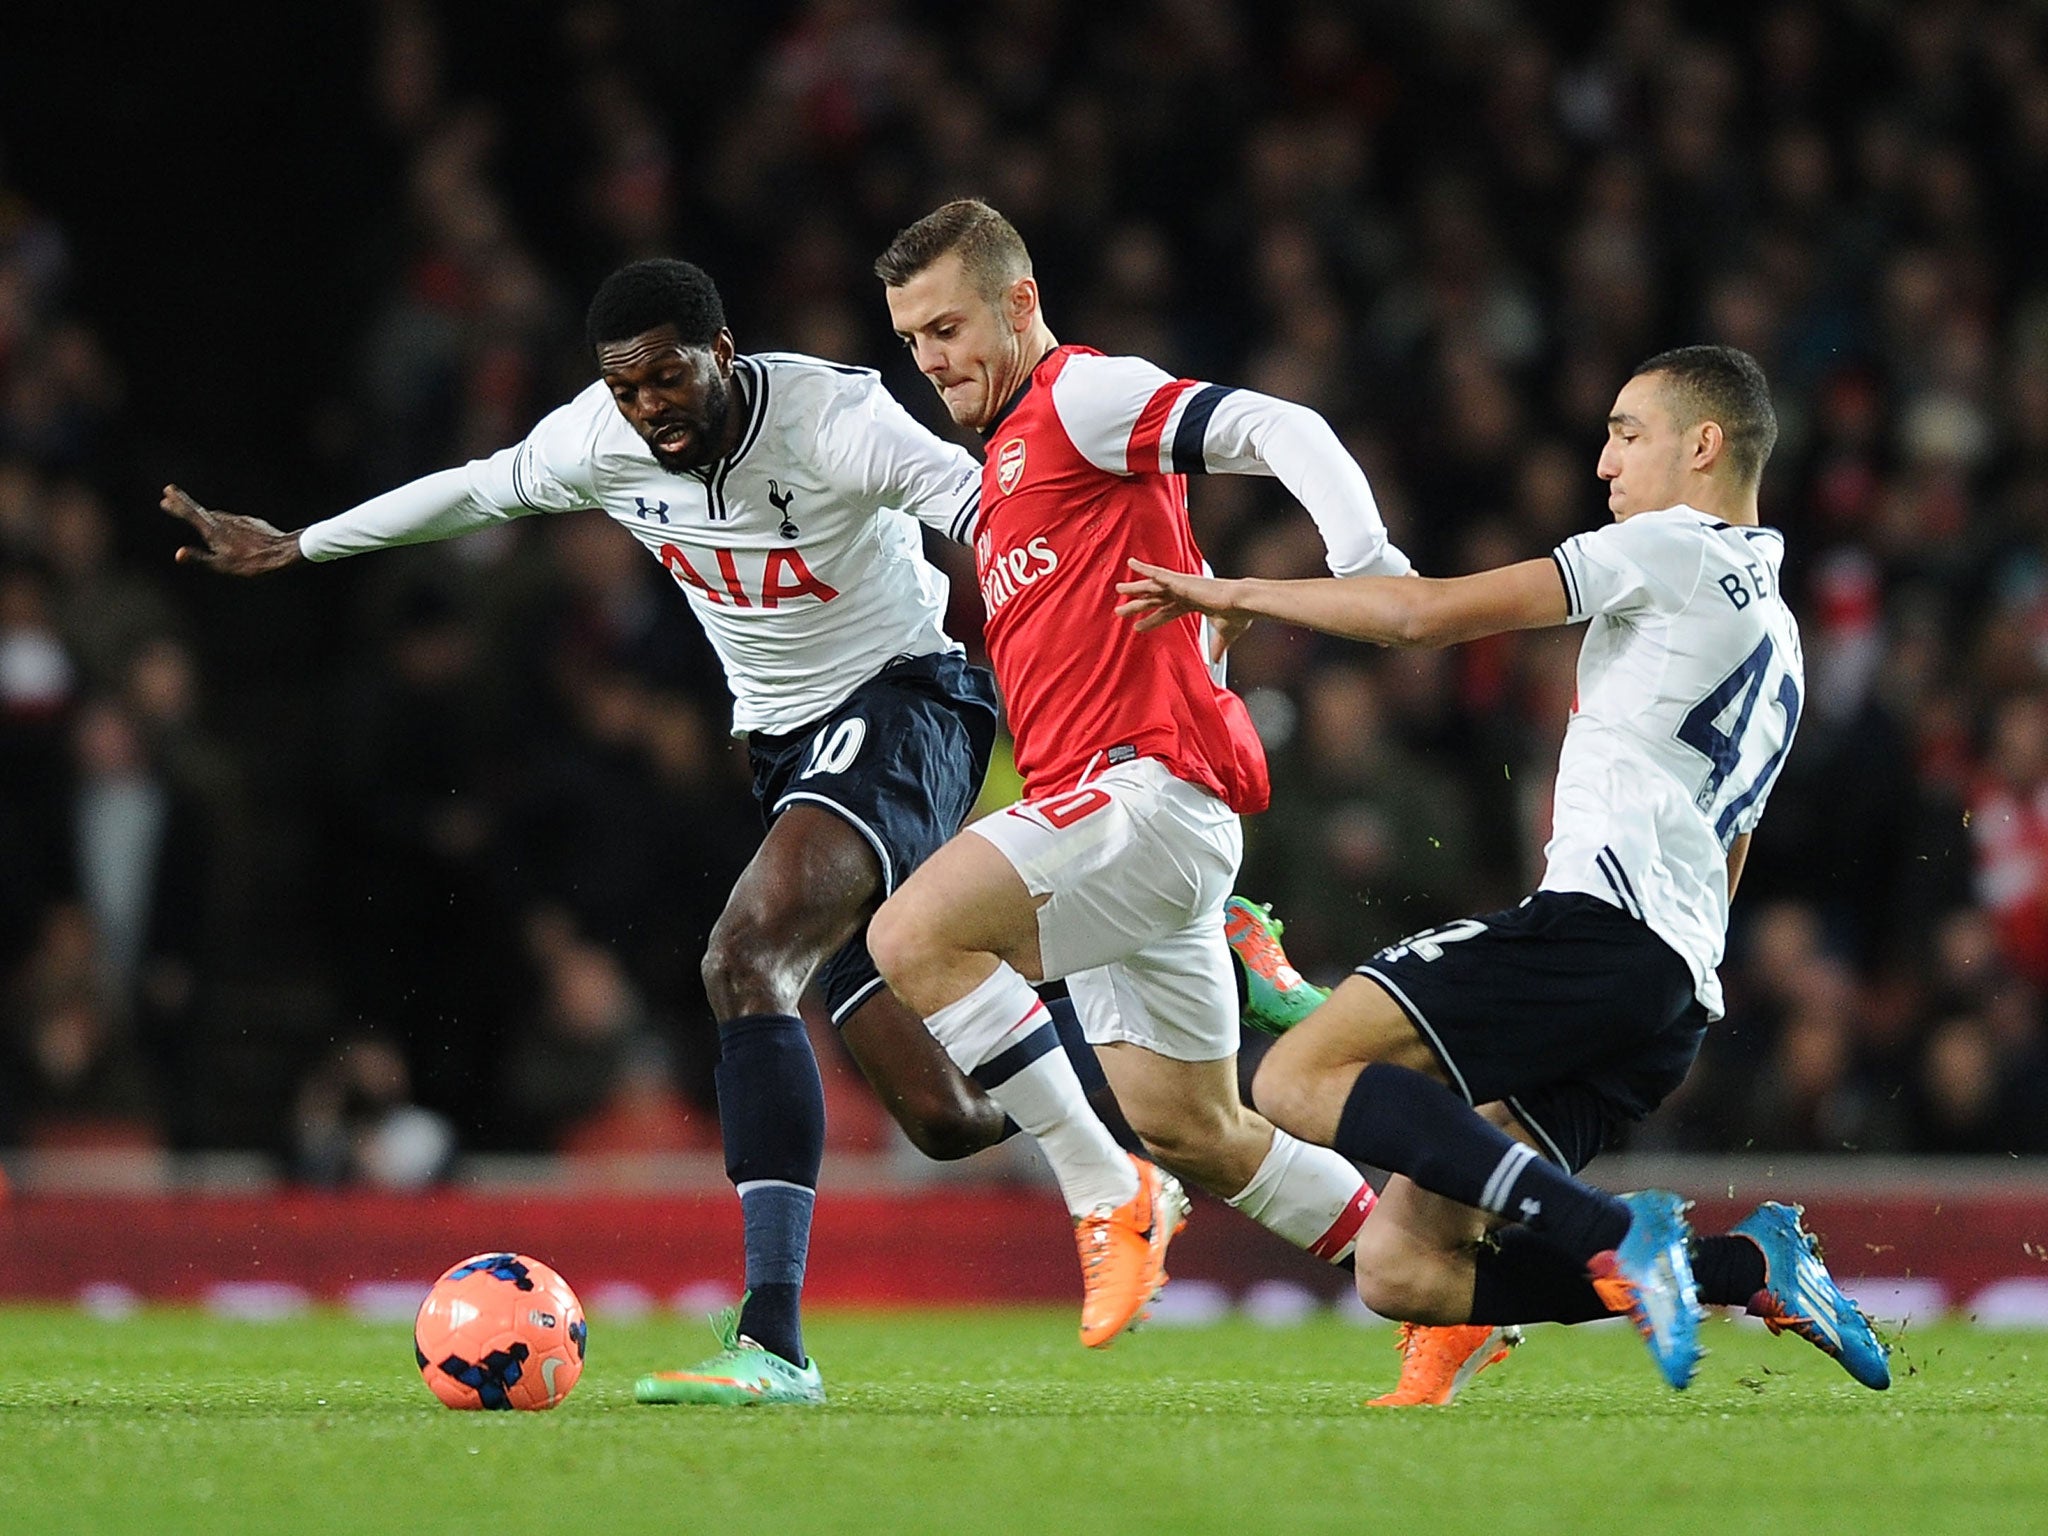 Jack WIlshere attempts to unlock the Tottenham defence during Arsenal's 2-0 FA Cup victory